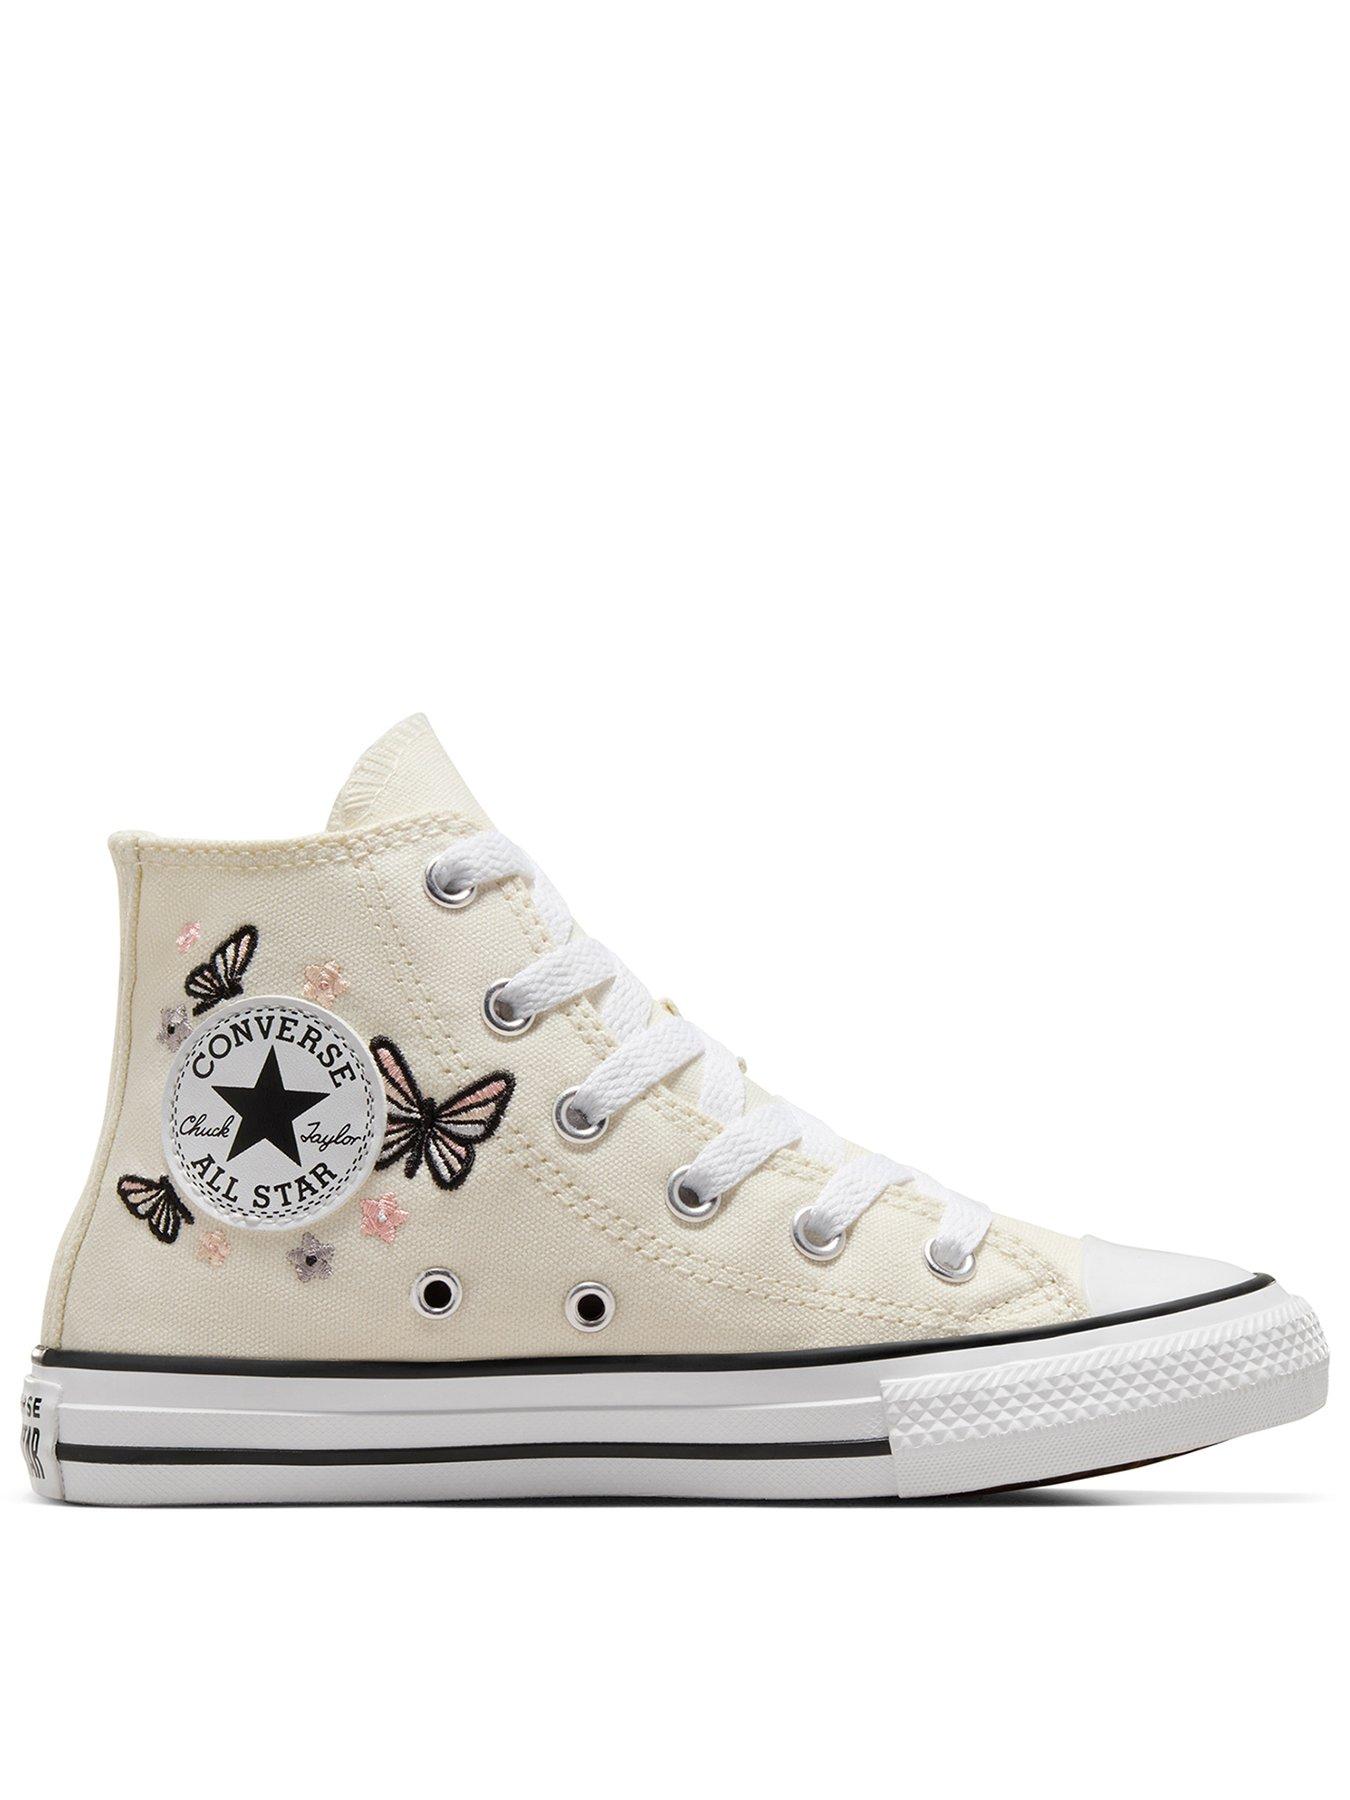 Converse Kids Girls Festival High Tops Trainers - Off White, Off White, Size 2 Older